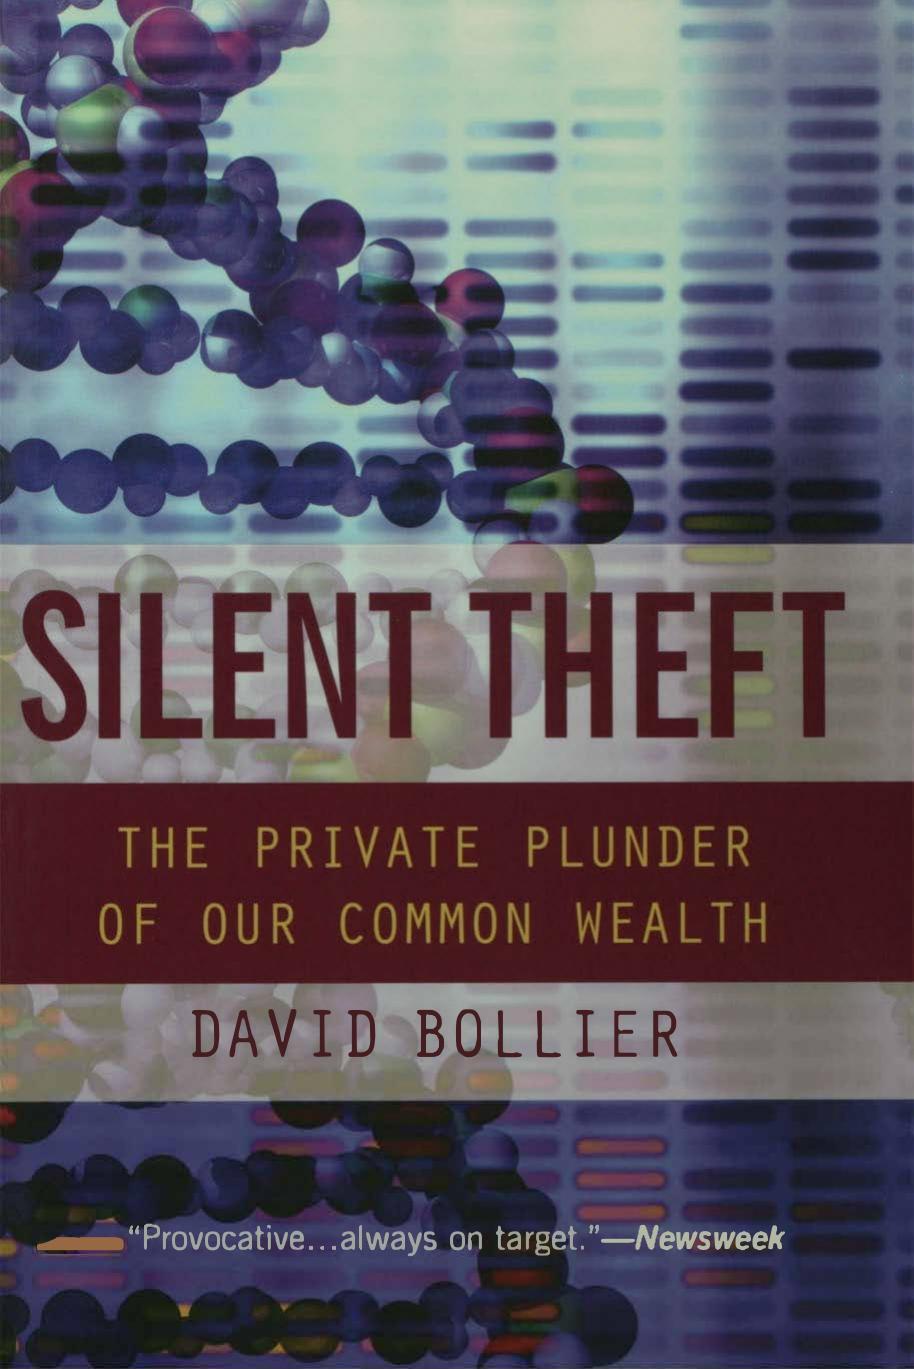 Silent Theft - Private Plunder of Our Common Wealth by David Bollier